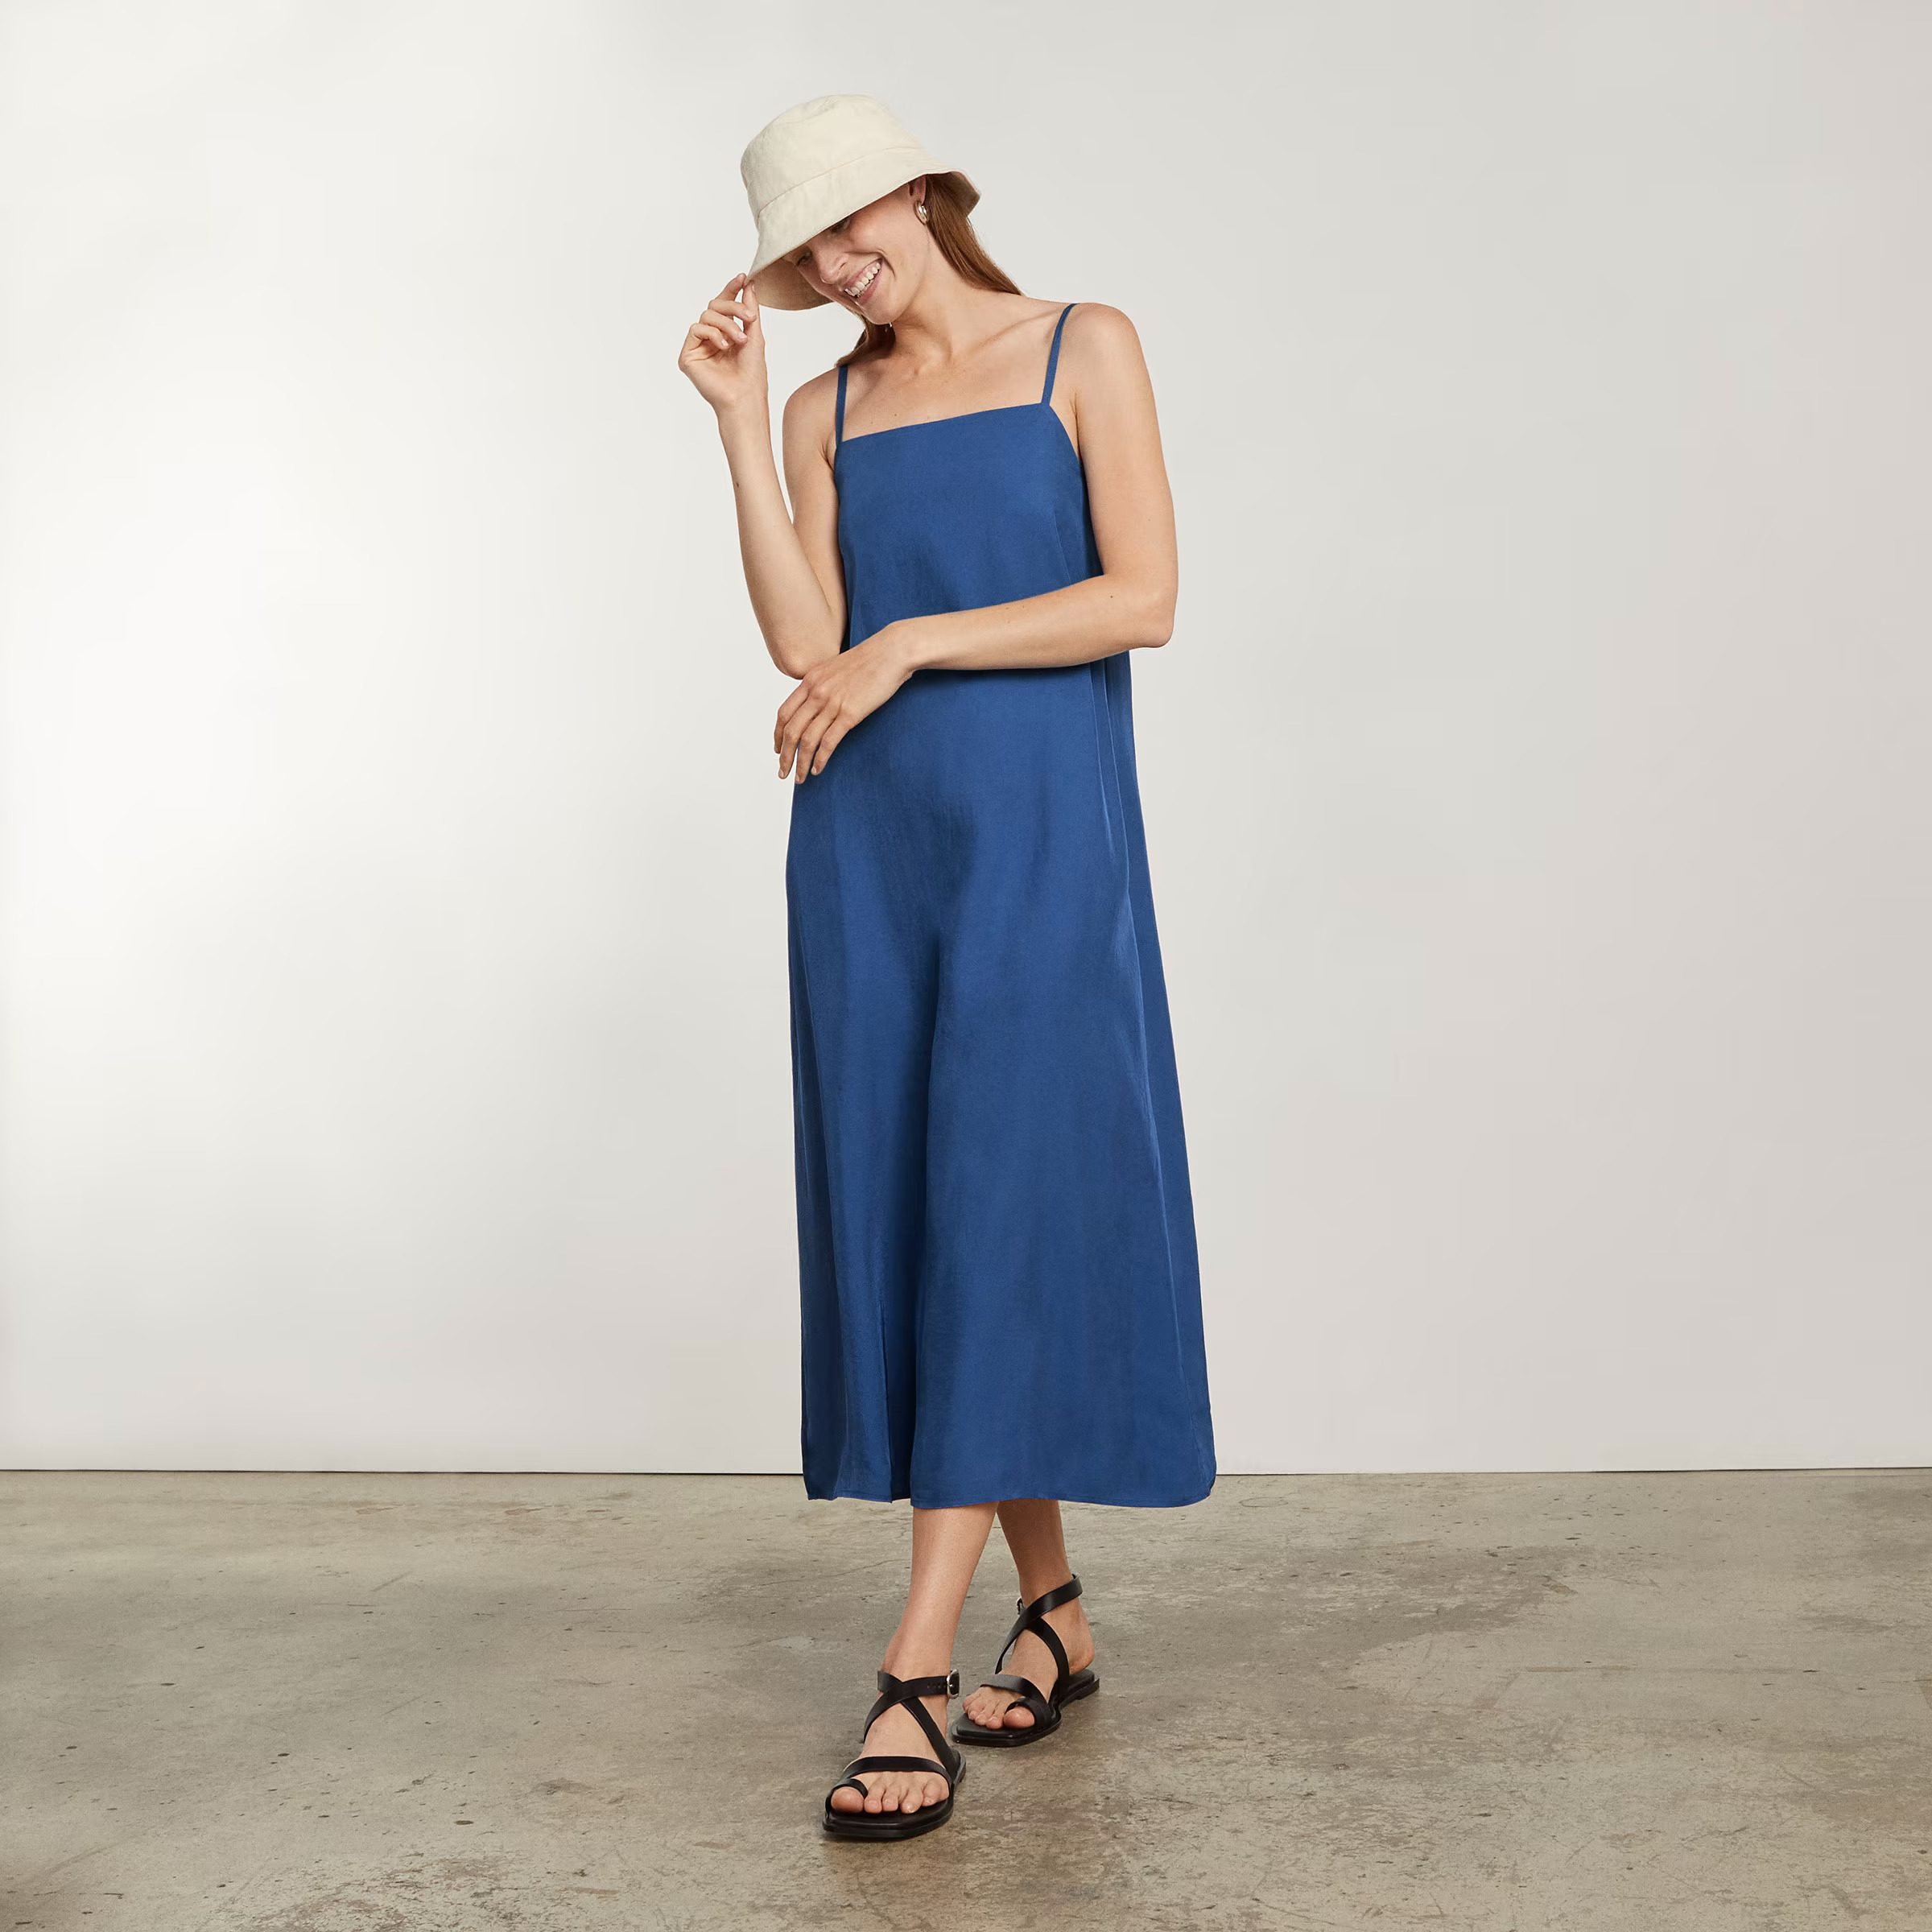 7 Best Petite Maxi Dresses for a No-Trip Summer in 2022